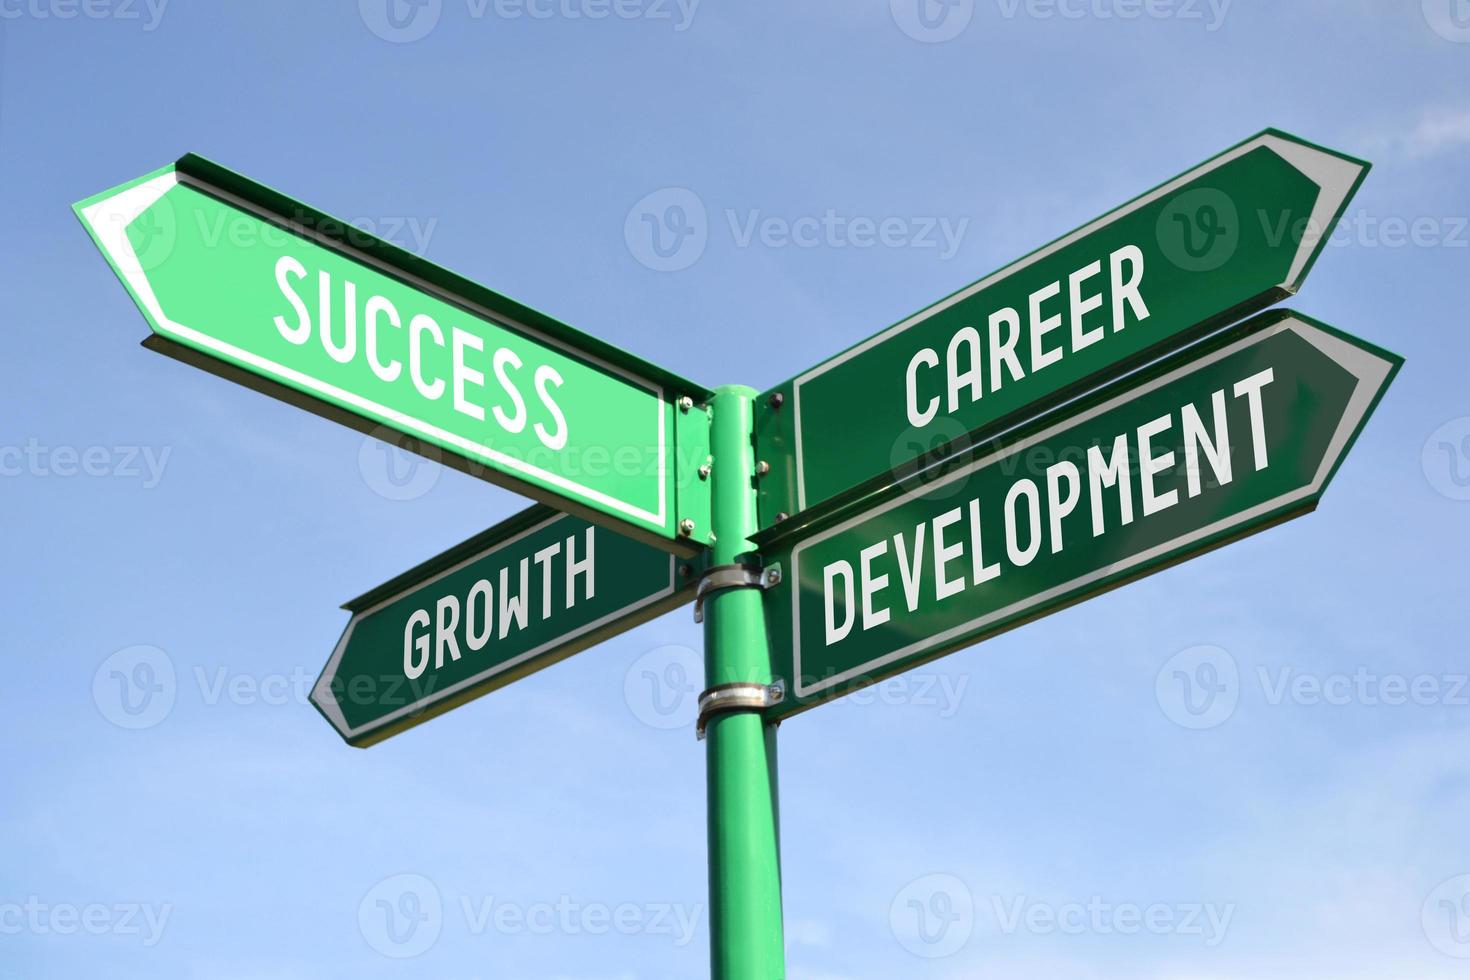 Success, Growth, Career, Development - Signpost With Four Arrows photo